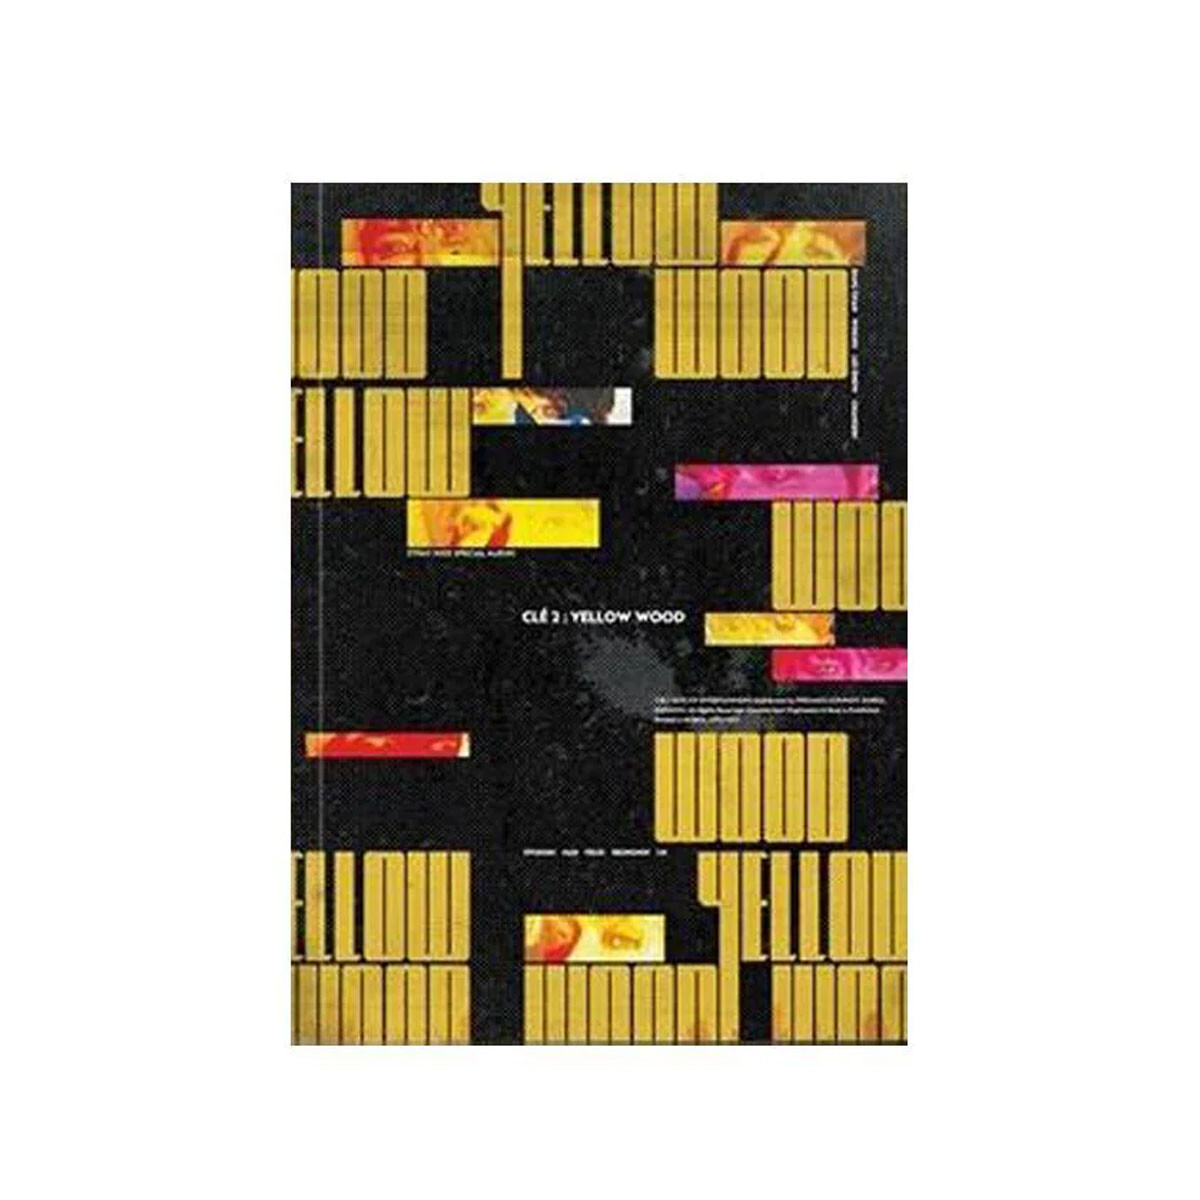 Stray Kids - Cle 2: Yellow Wood (special Alb - Cd 